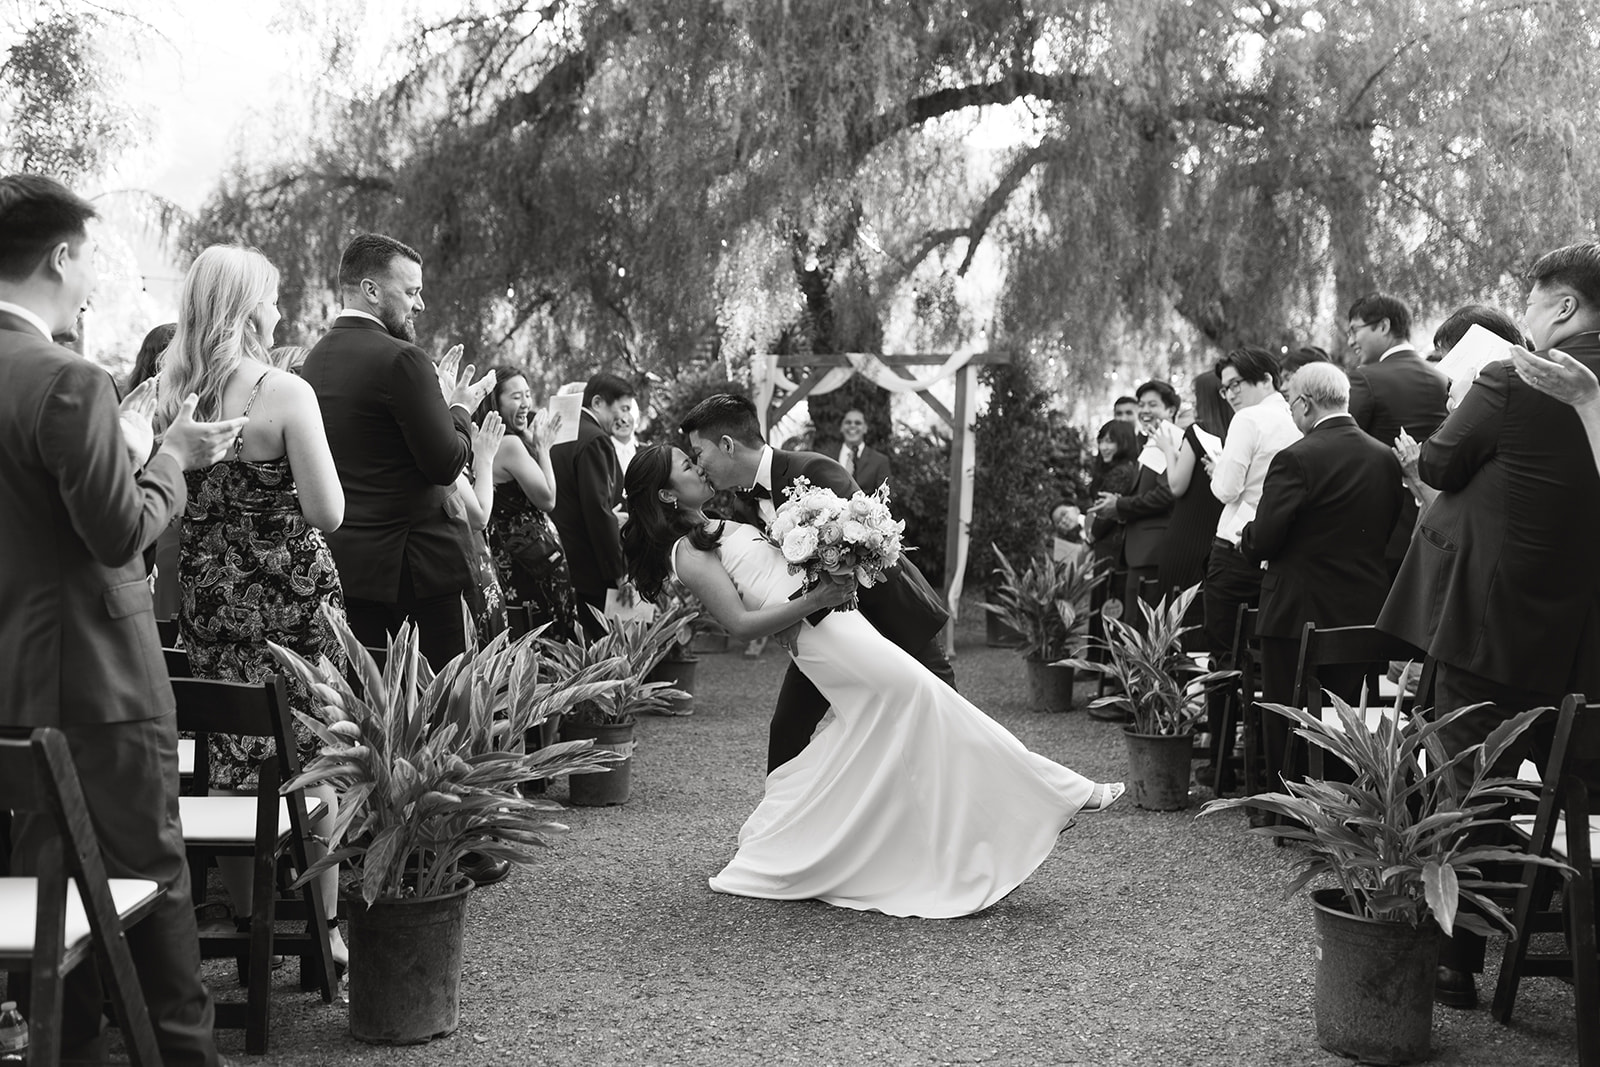 wedding the greenhouse pnoc orange county california bride and groom kiss wedding ceremony pictures musician live music